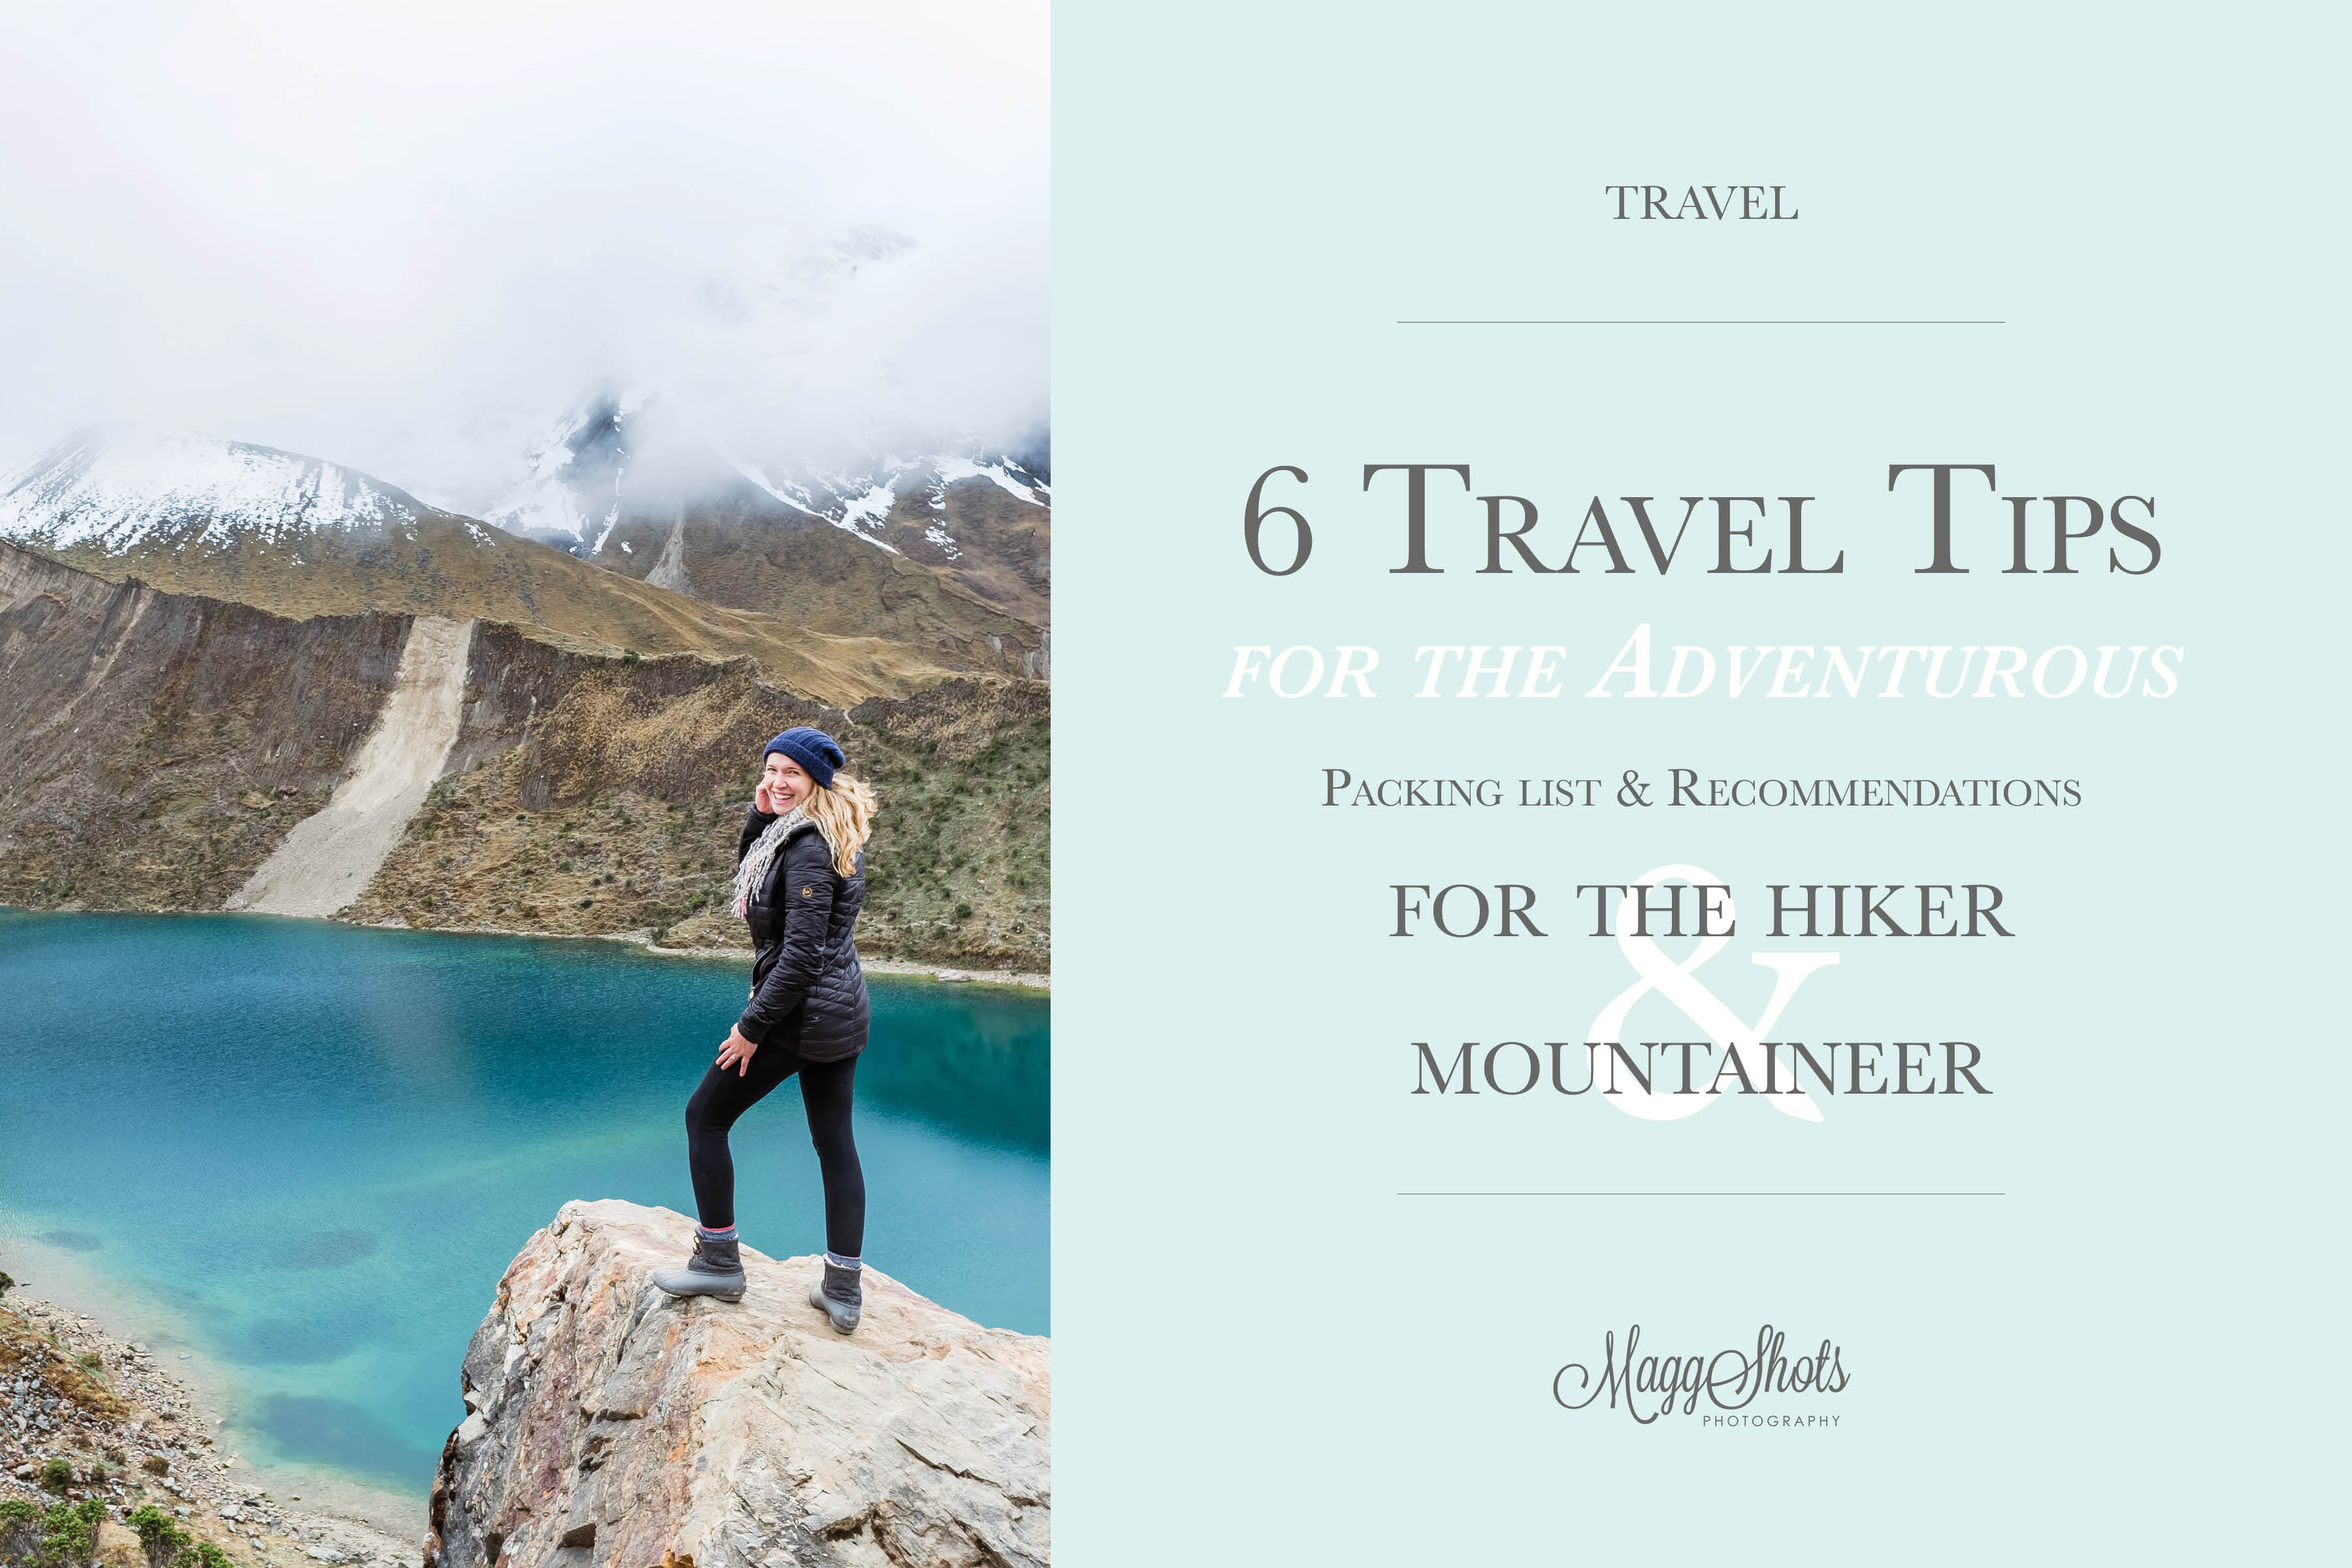 6 Travel Tips for the Adventurous | Packing List & Recommendations for the Hiker & Mountaineer